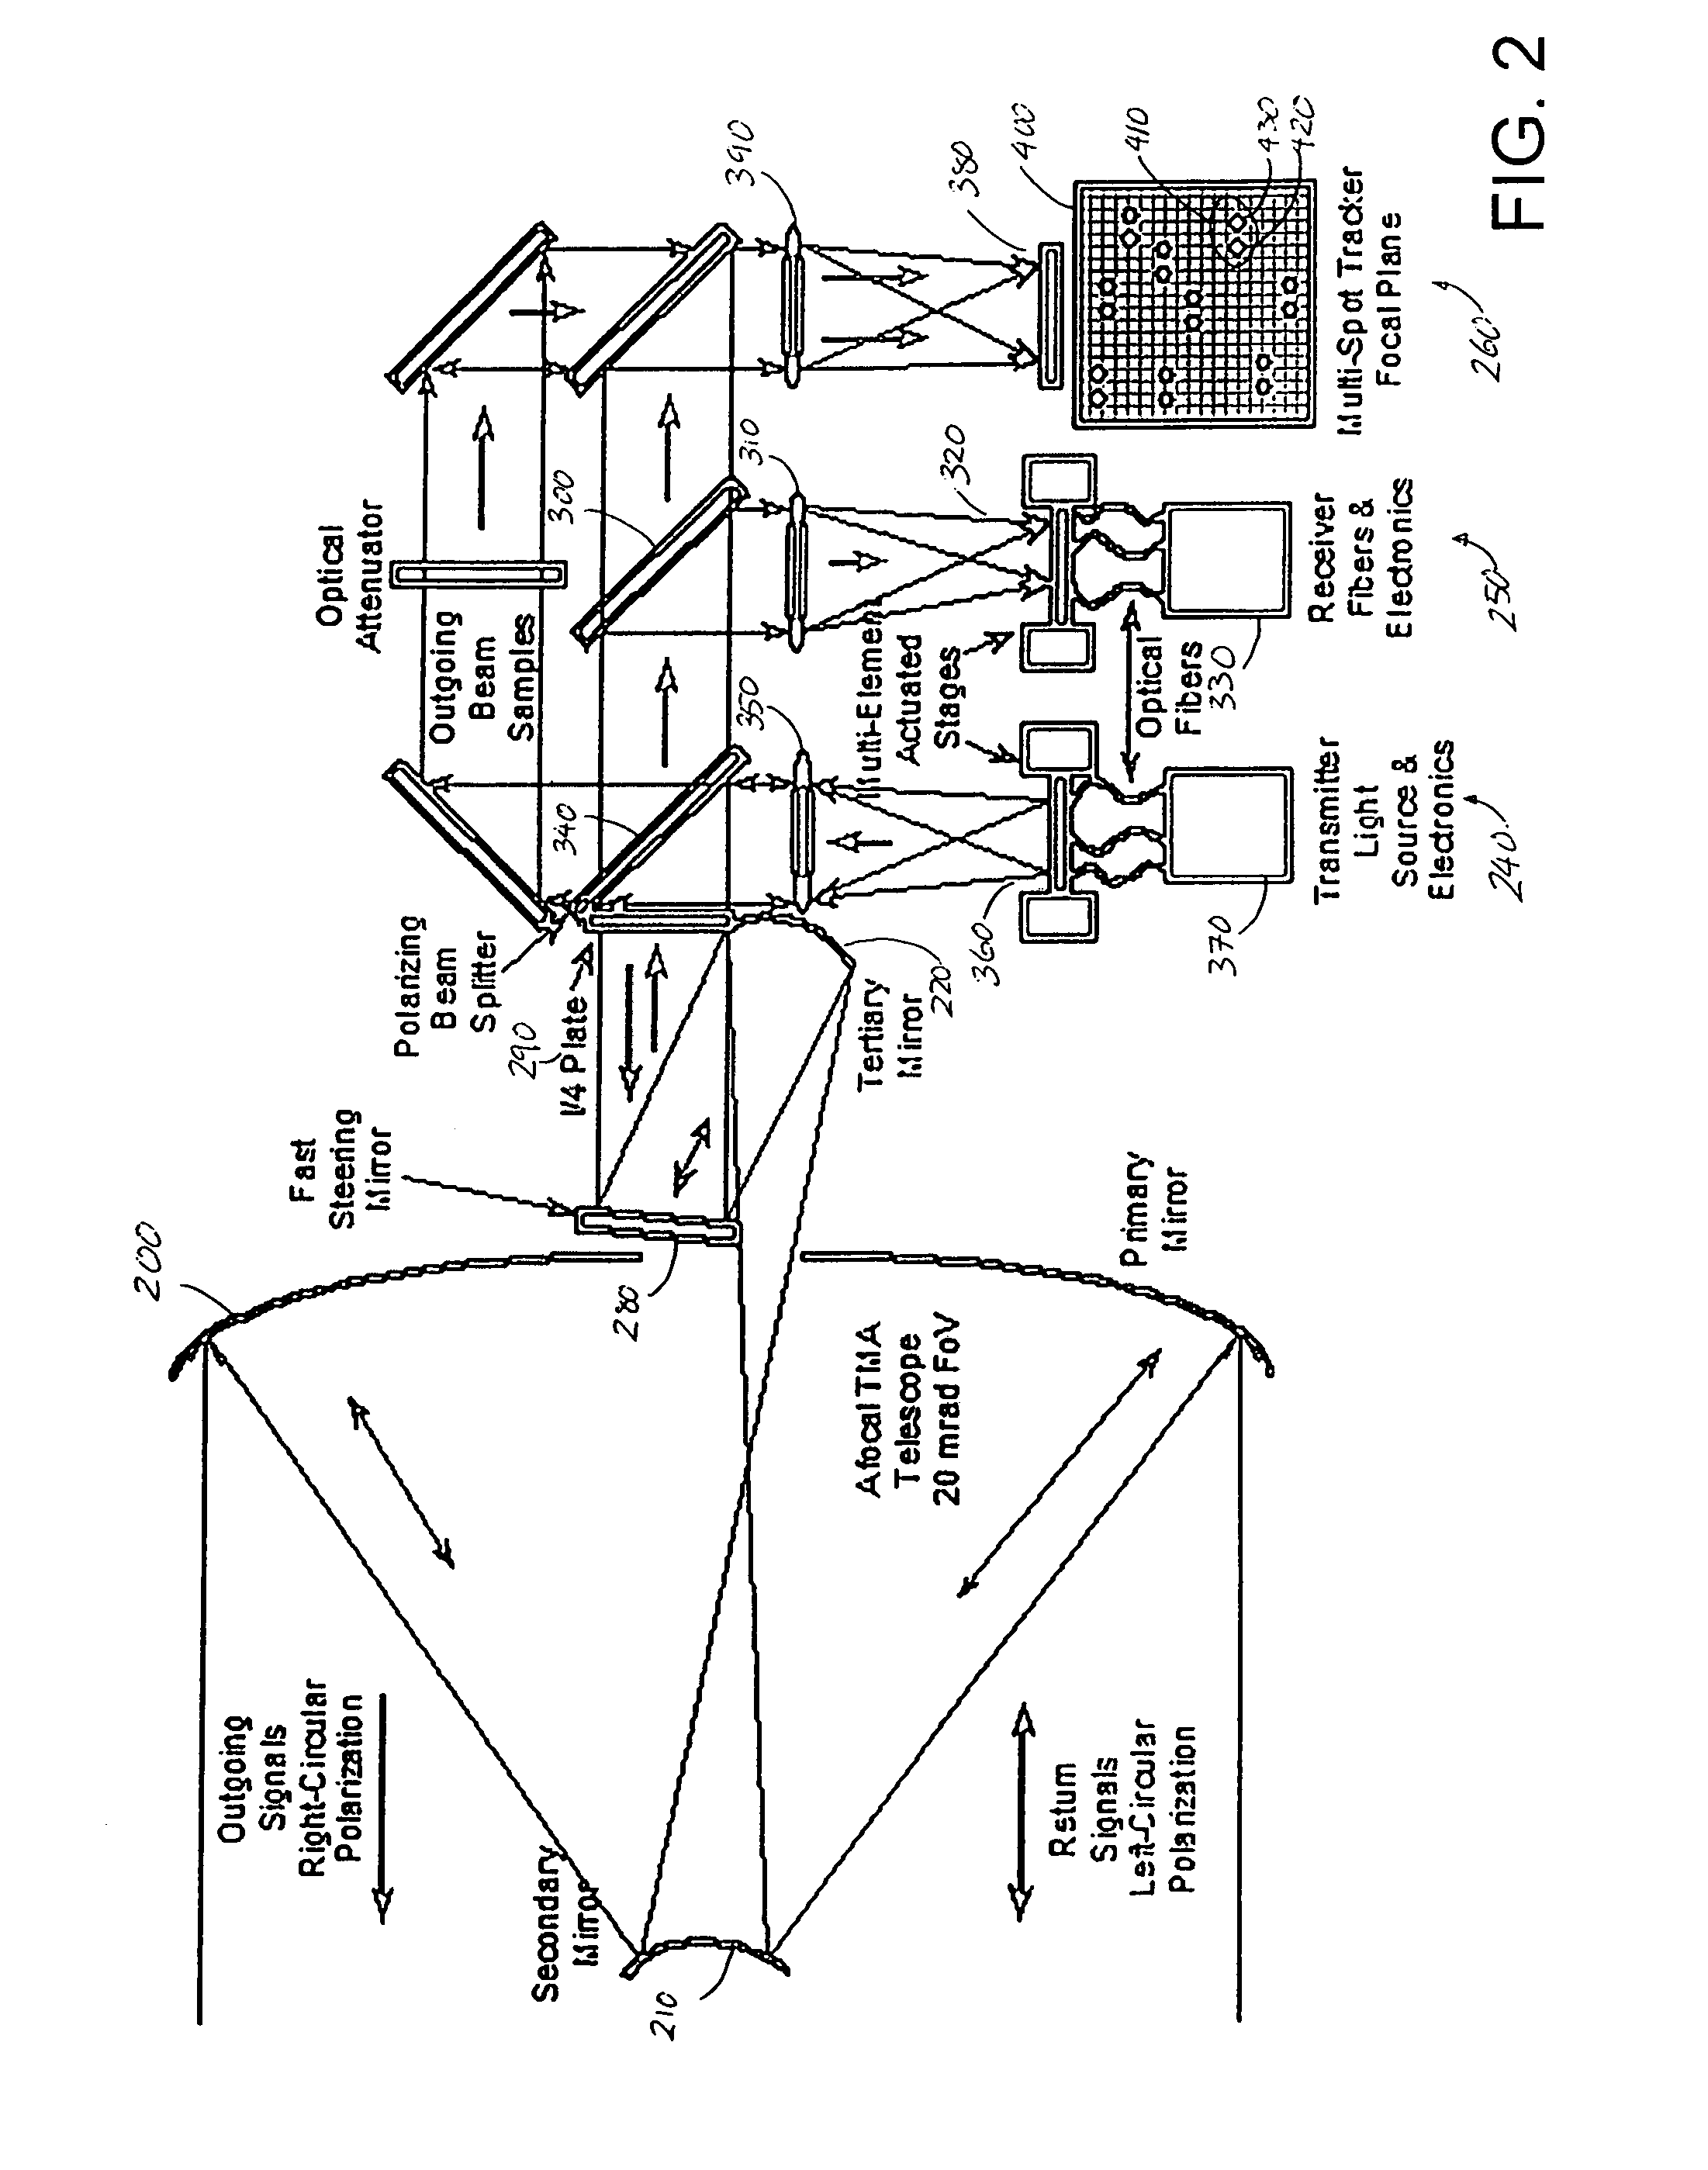 Multi-beam laser communications system and method